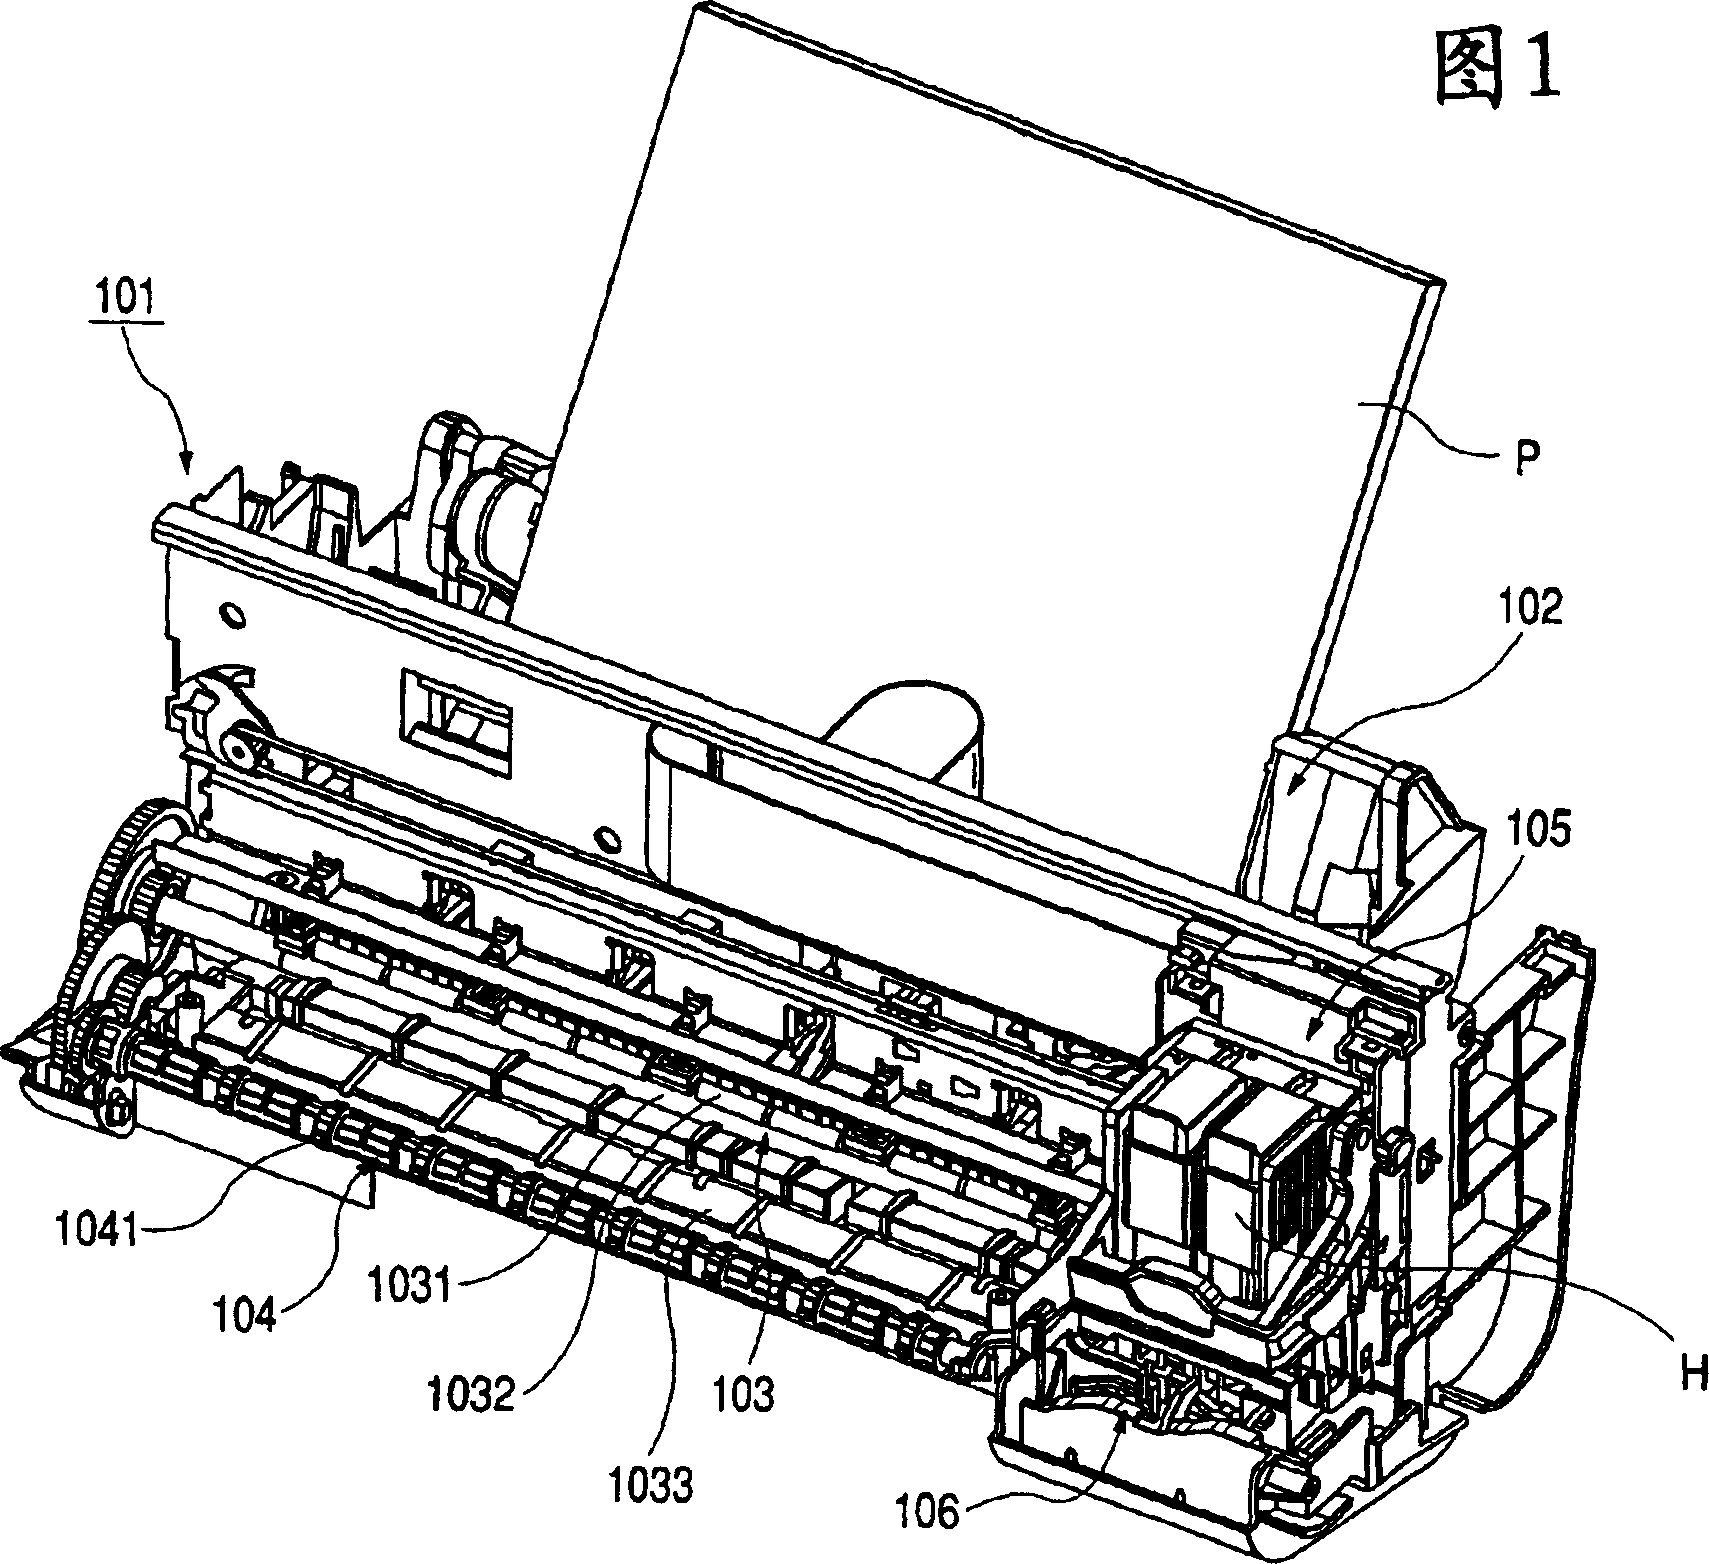 Ink-jet recording device and cleaning part of the same recording device